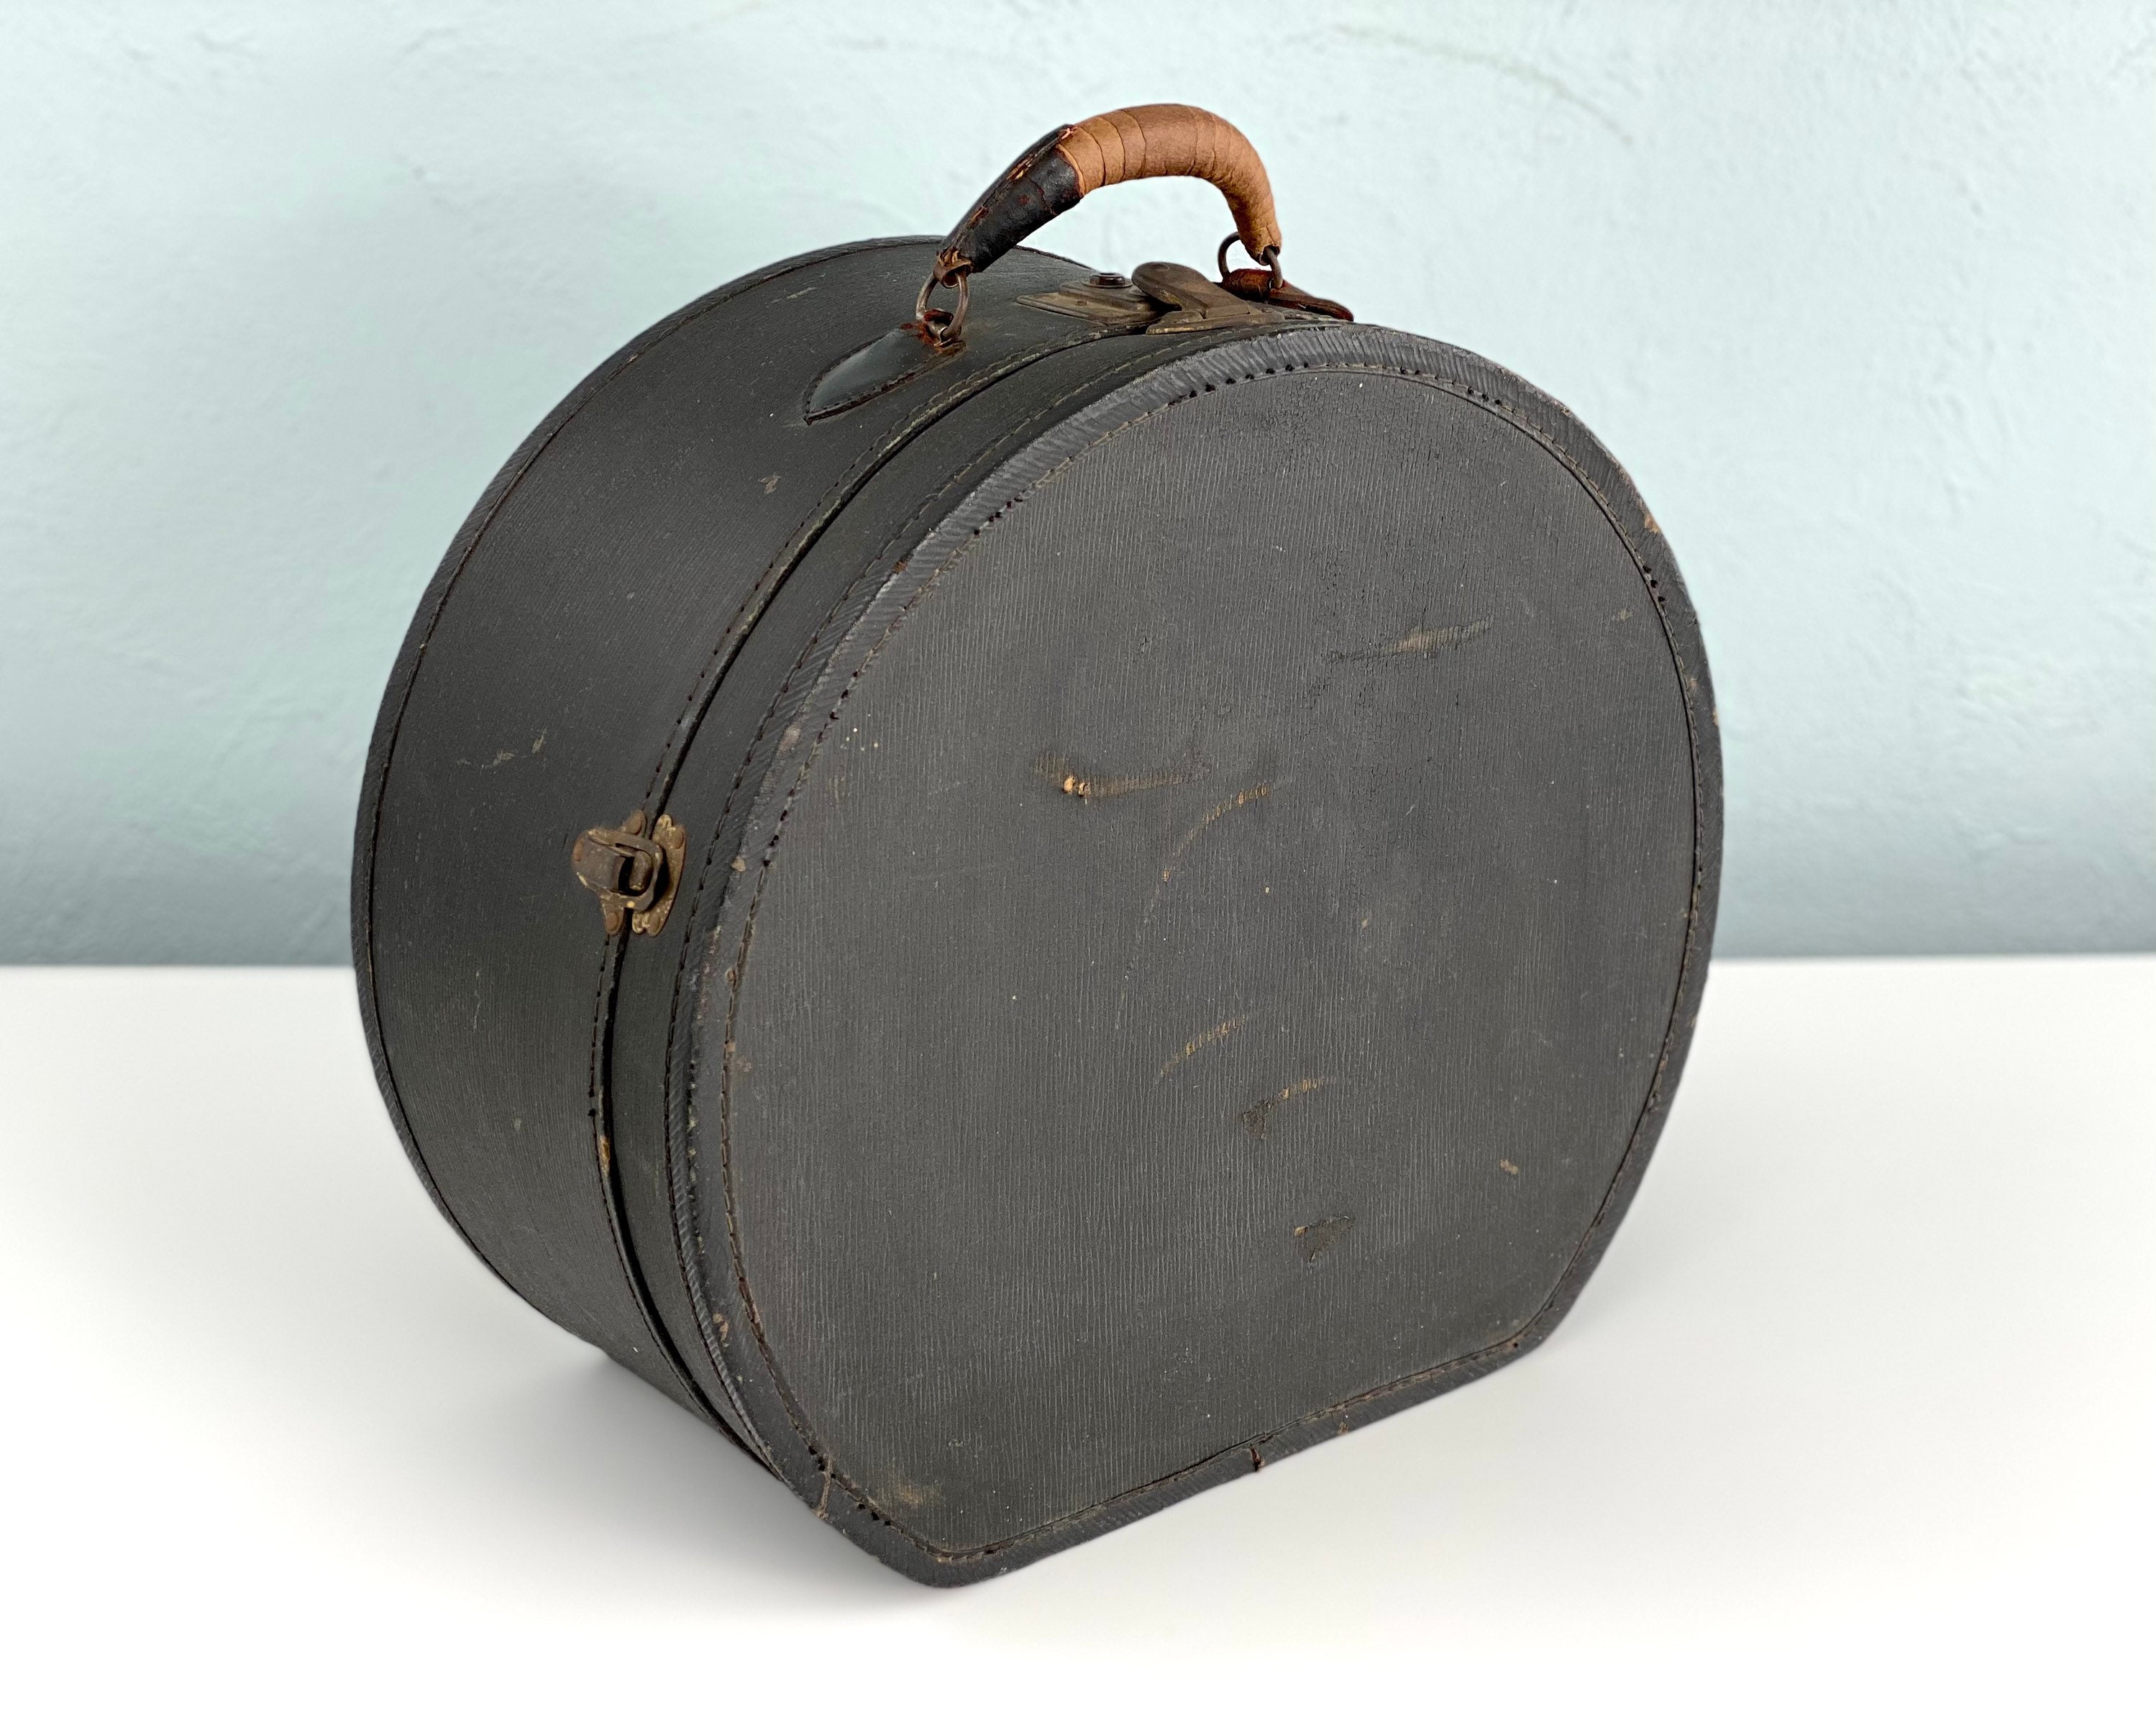 Near Mint Round Brown Vintage Luggage Suitcase Hat Box by Travel Joy -  antiques - by owner - collectibles sale 